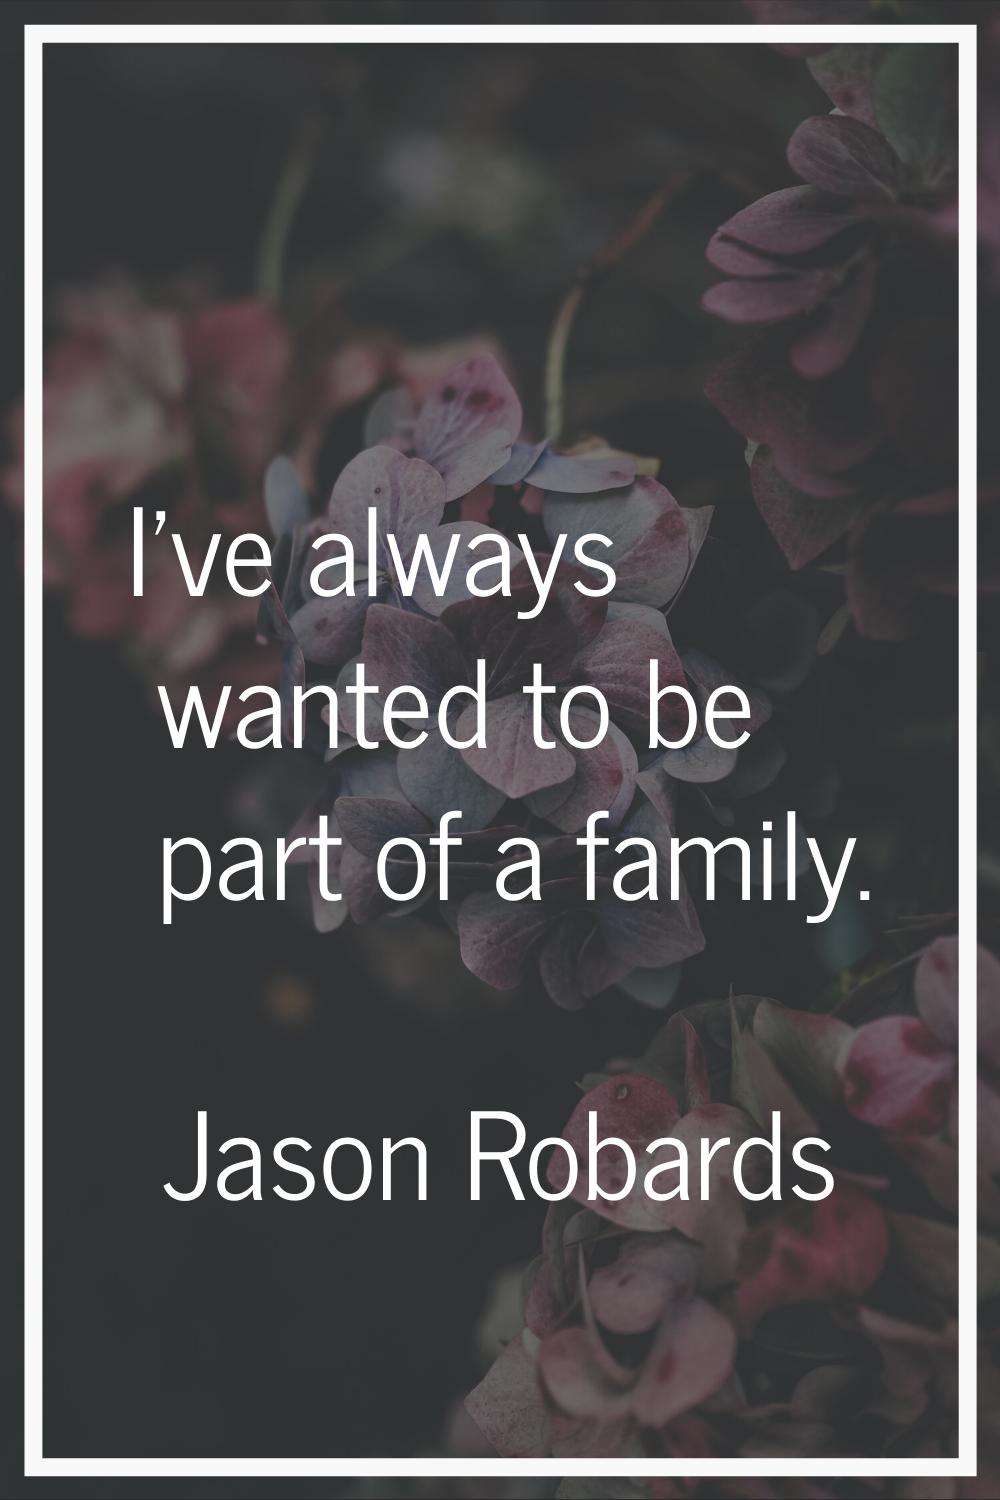 I've always wanted to be part of a family.